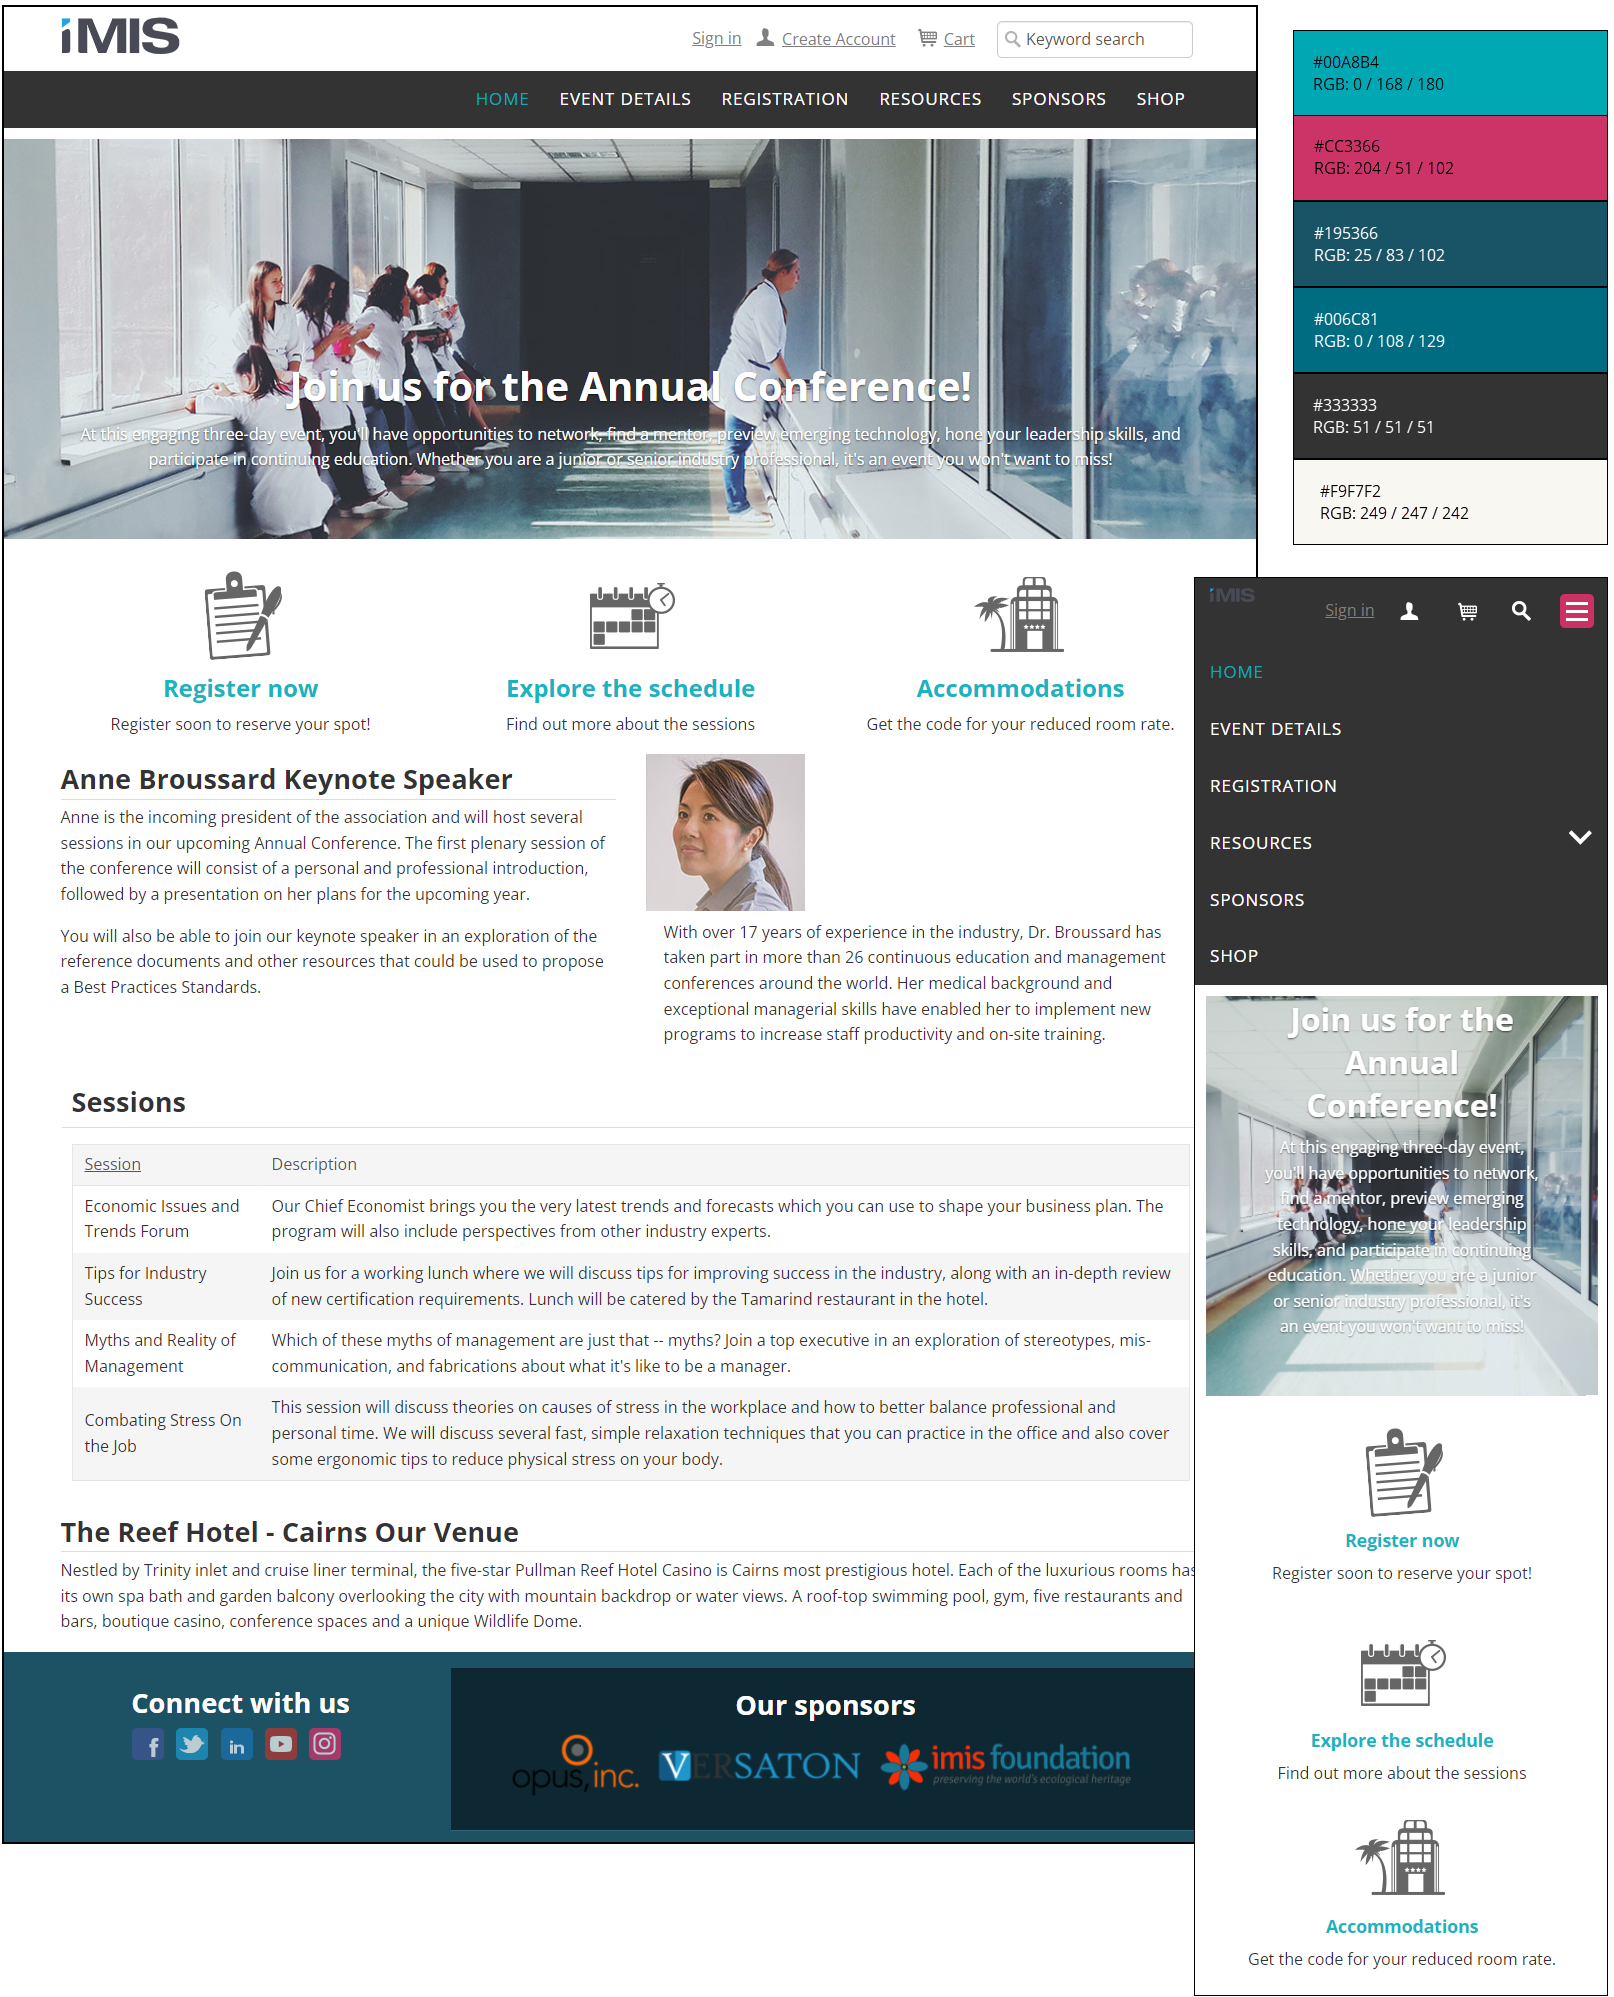 Viewing the Toronto Responsite theme and color scheme